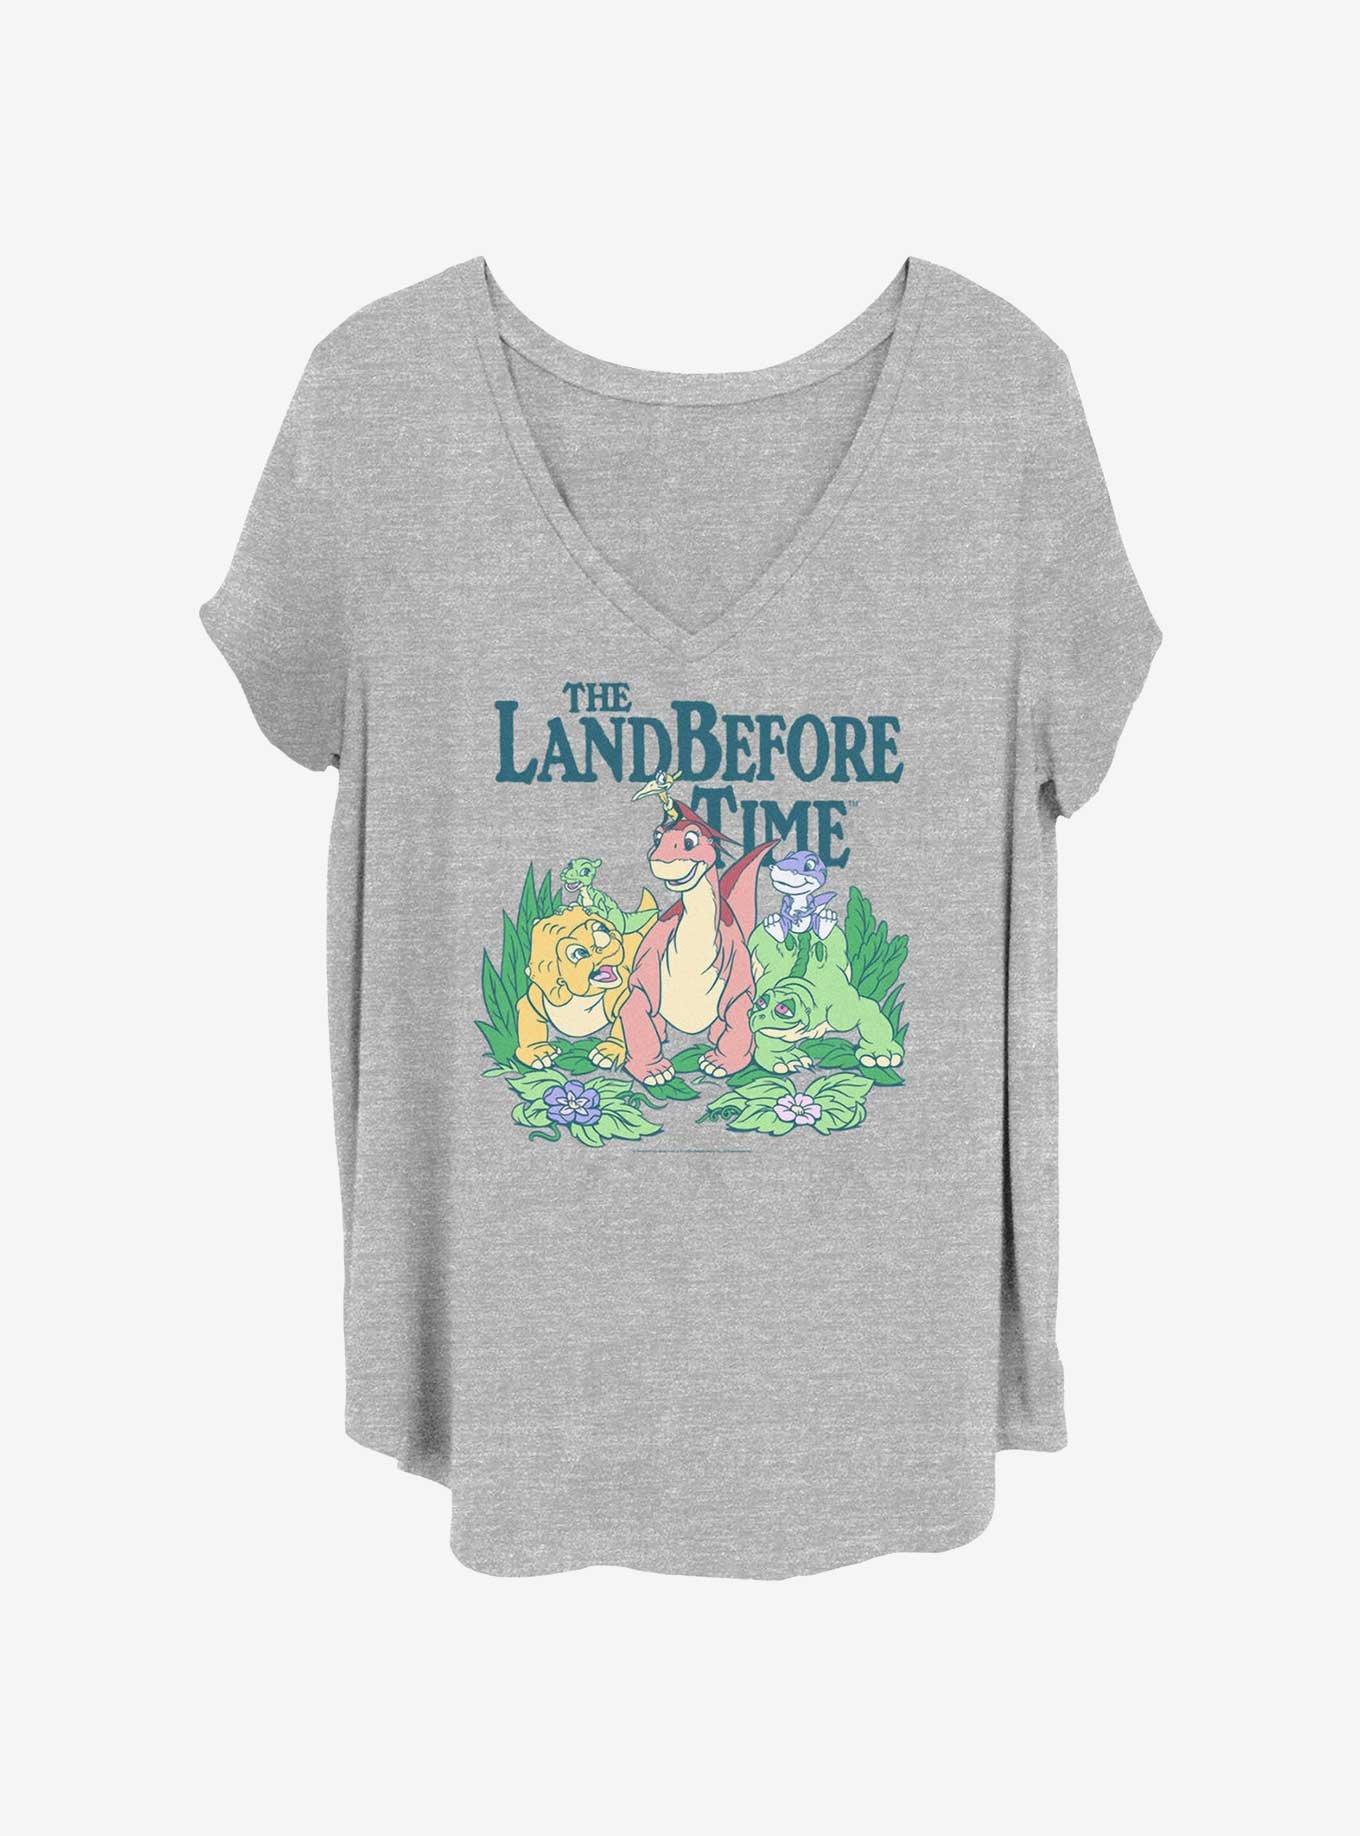 The Land Before Time Friends Girls T-Shirt Plus